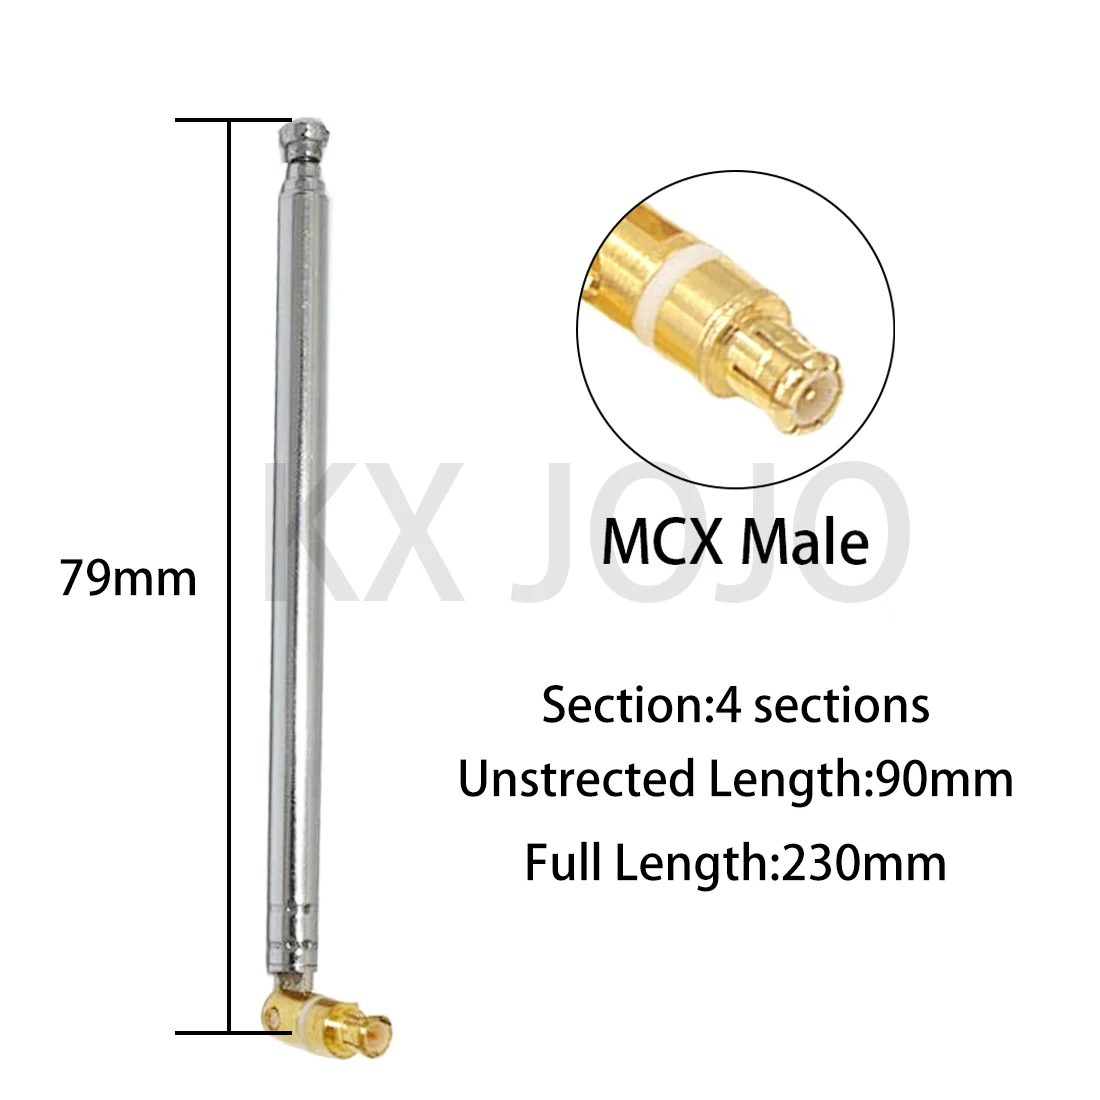 

Telescopic Antenna 4 sections MCX Male Connector for Terrestrial HDTV Antenna Navigation Antenna TV Card 1pc